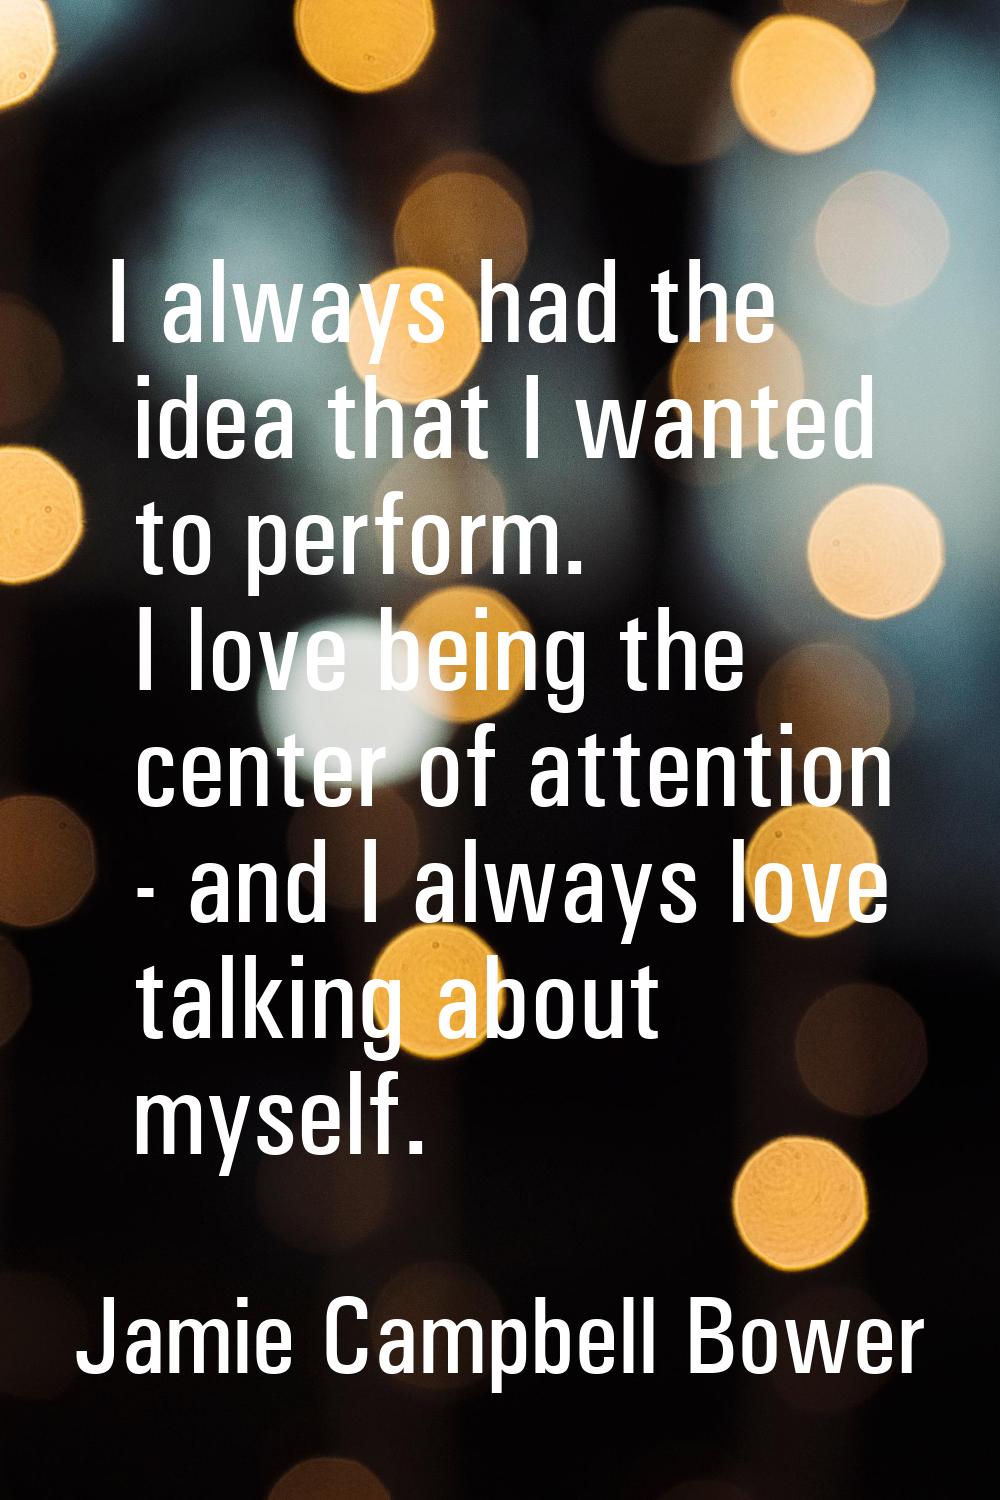 I always had the idea that I wanted to perform. I love being the center of attention - and I always